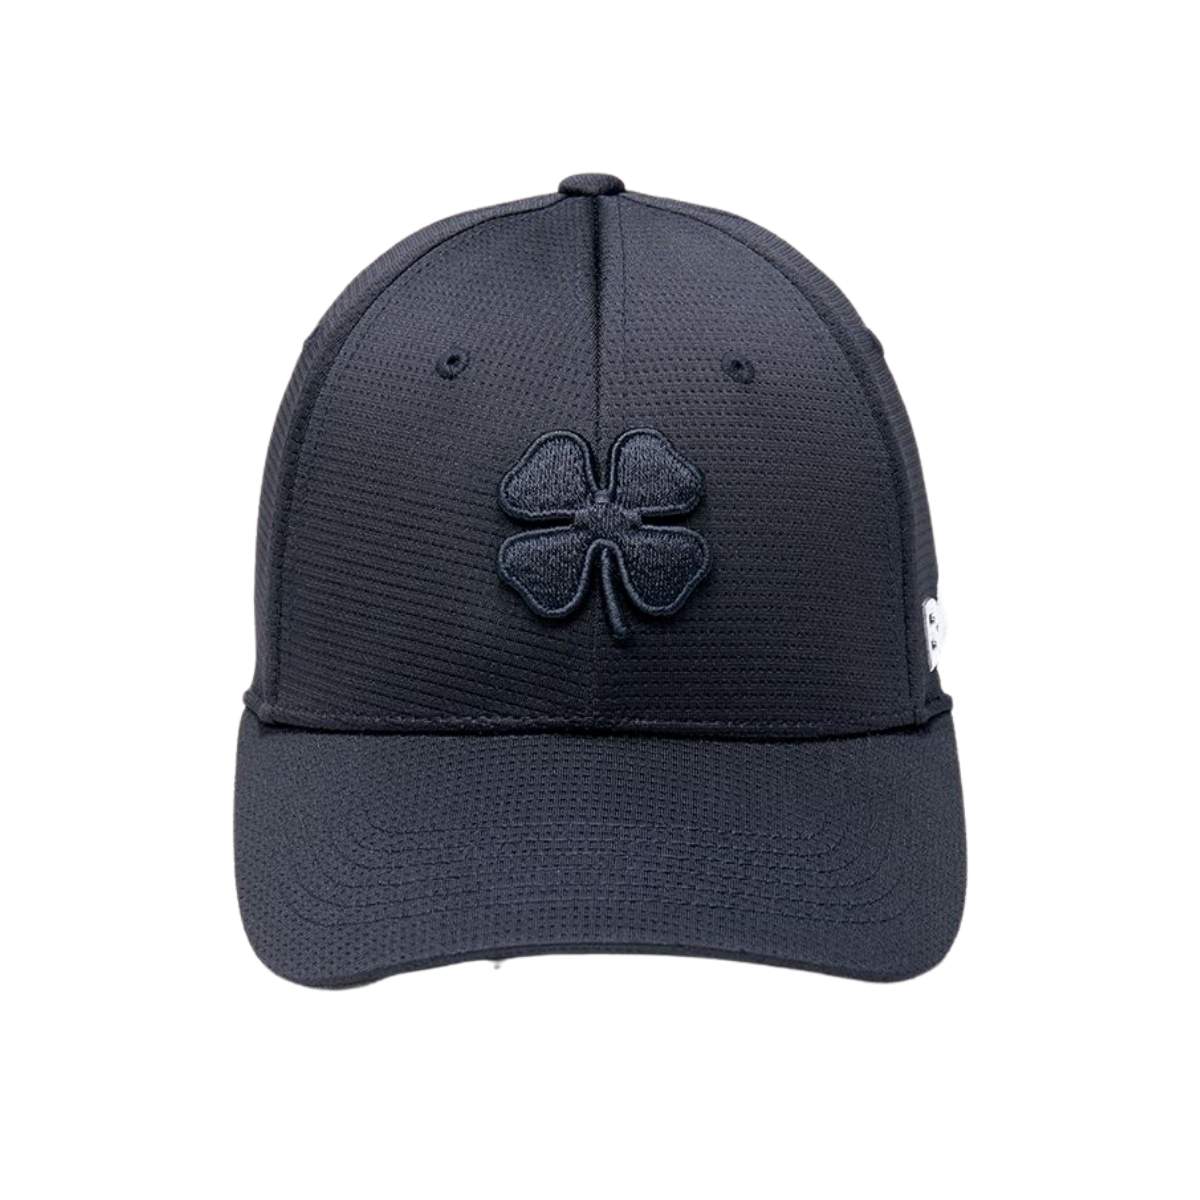 Black Clover Iron X Shadow Fitted Hat